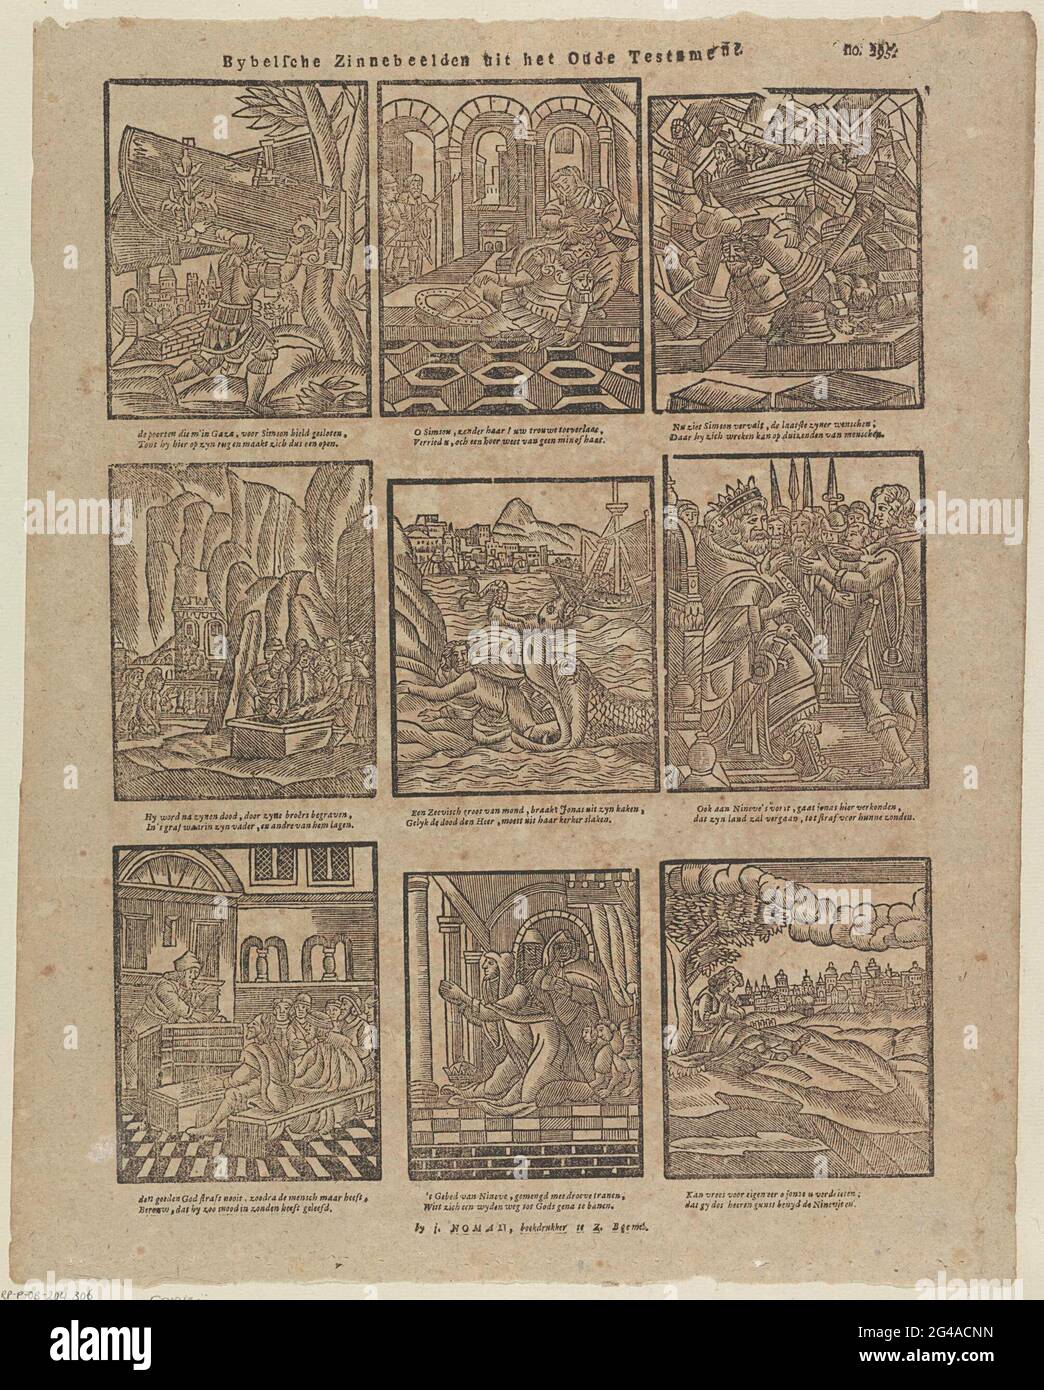 Bybelche Ziennmarks from the Old Testament. Leaf with 9 performances of stories from the Old Testament, such as the death of Simson and Jonah thrown on dry. Under each image a two-legged fresh. Numbered at the top right: No. 295. Stock Photo